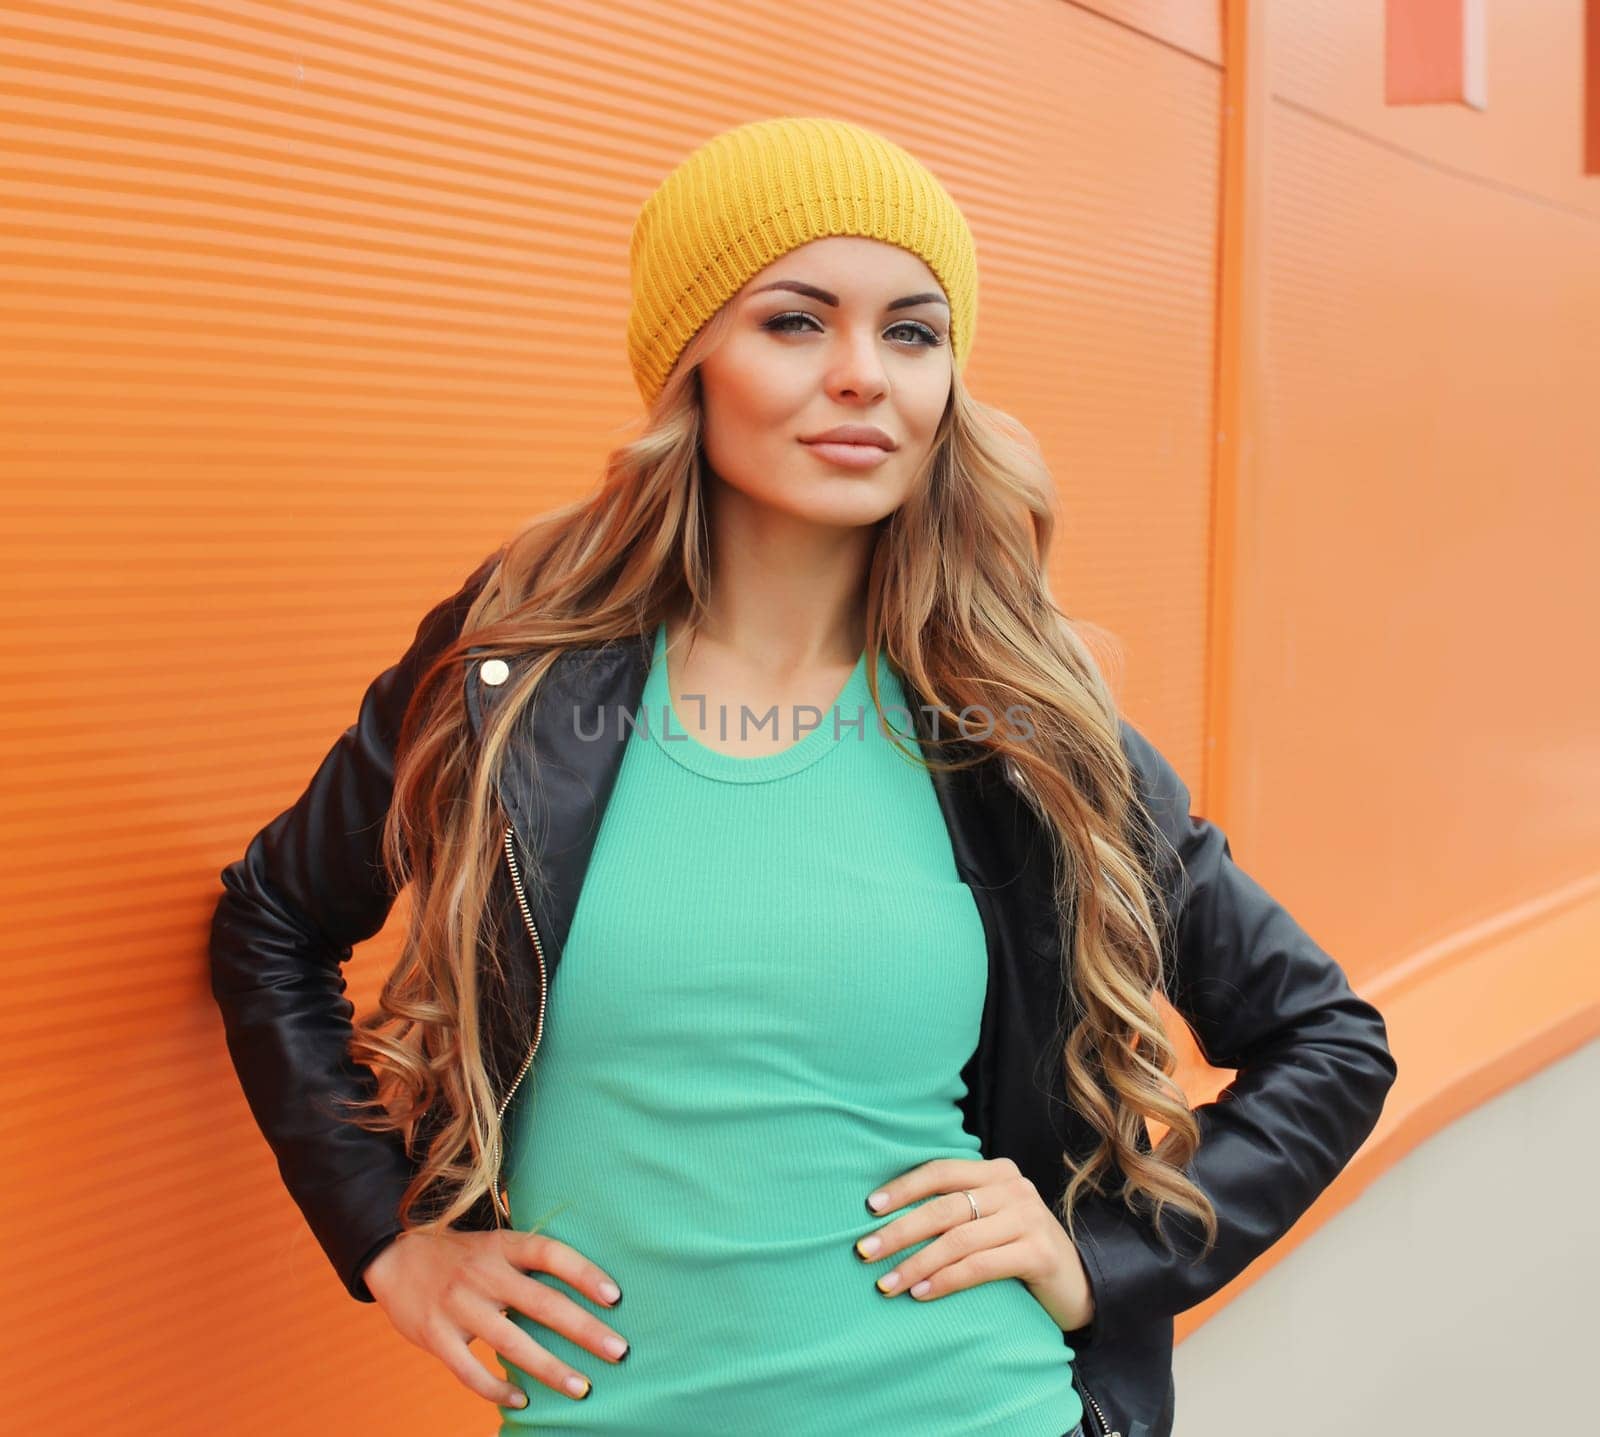 Portrait of beautiful young blonde woman posing in yellow hat, black leather jacket looking at camera on colorful orange background